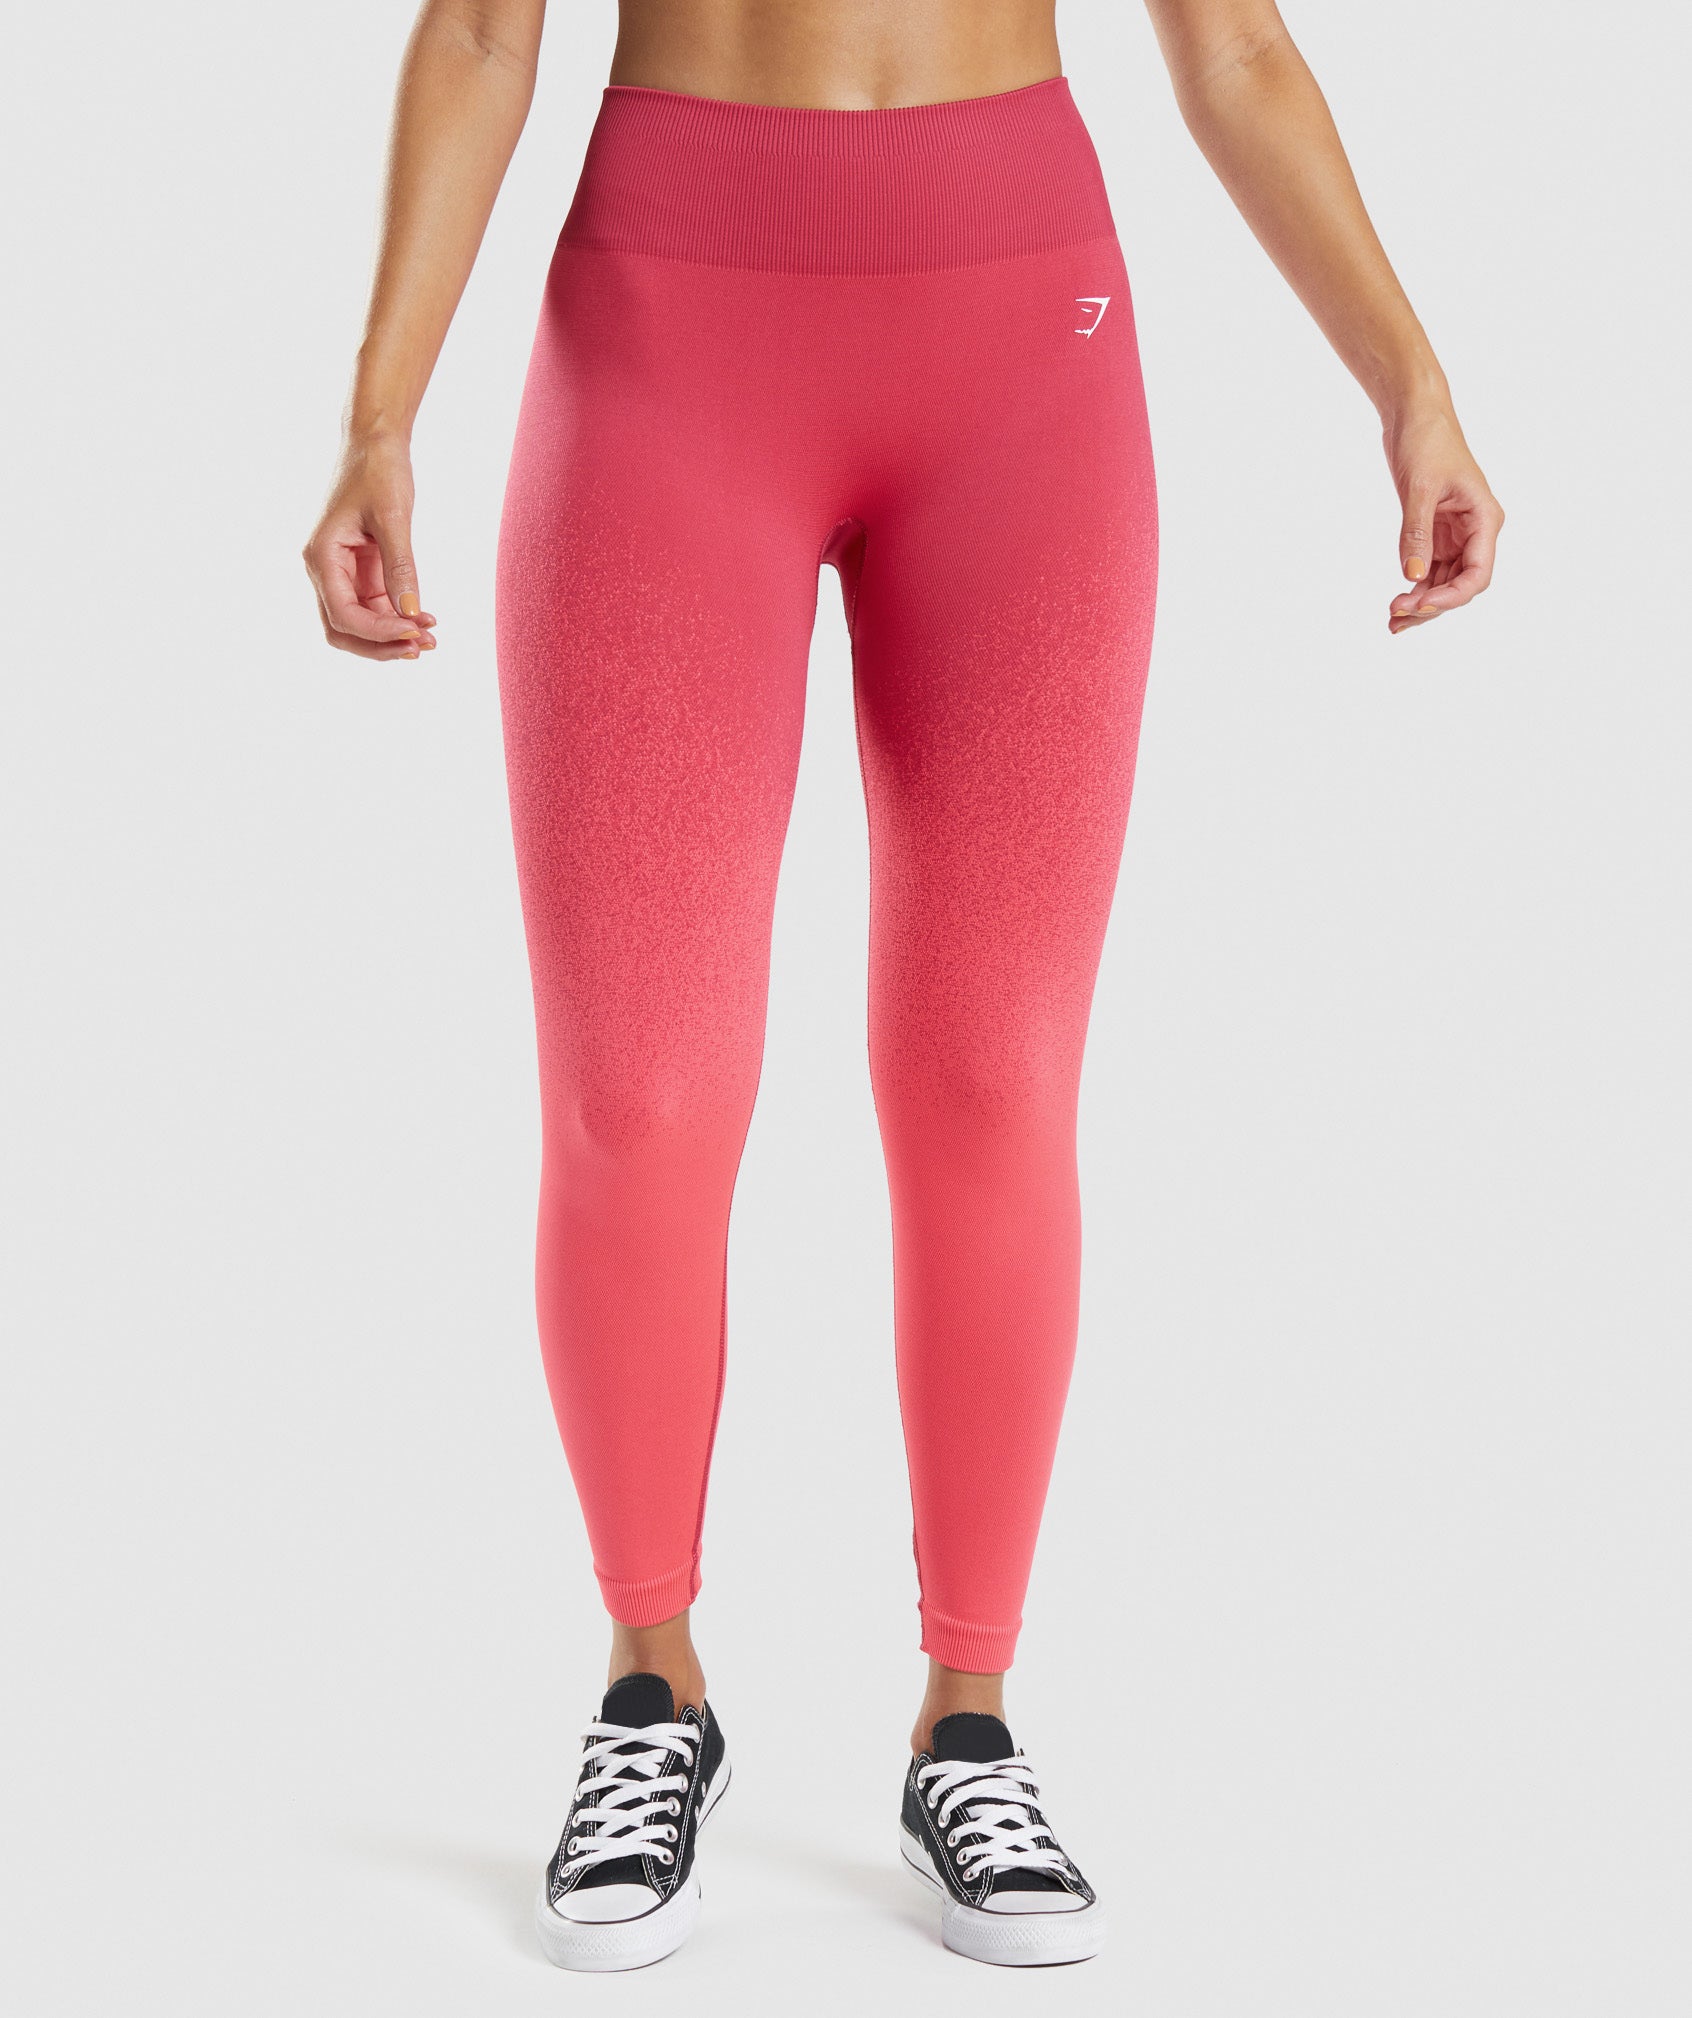 GYMSHARK ADAPT OMBRE Seamless Leggings Womens READ Gray Pink Gym Training  Yoga $6.98 - PicClick